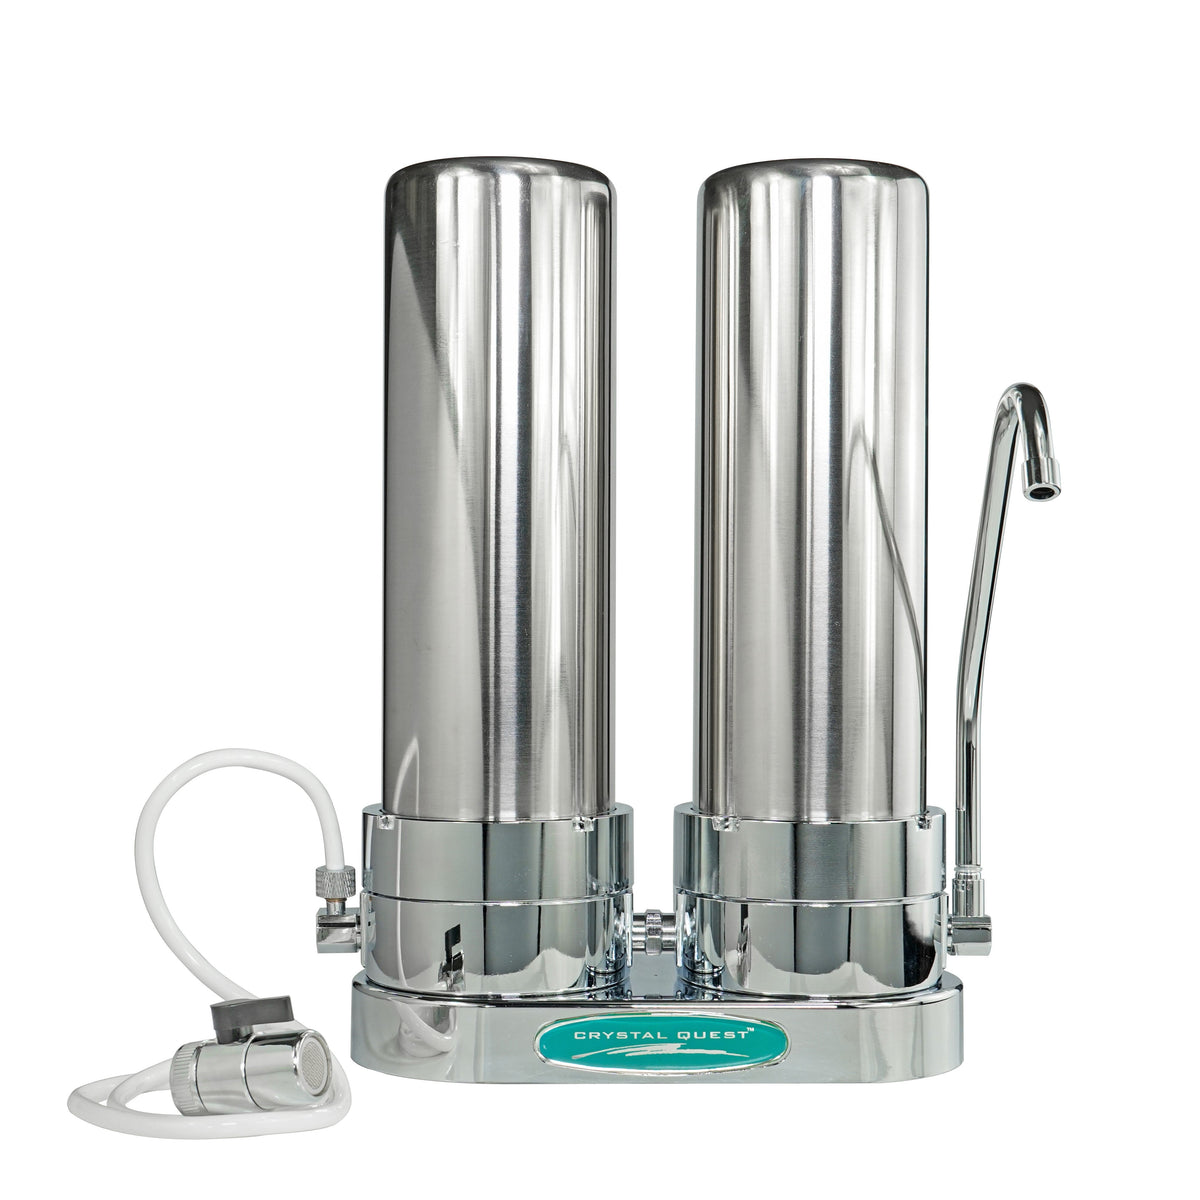 Double / Stainless Steel Fluoride Countertop Water Filter System - Countertop Water Filters - Crystal Quest